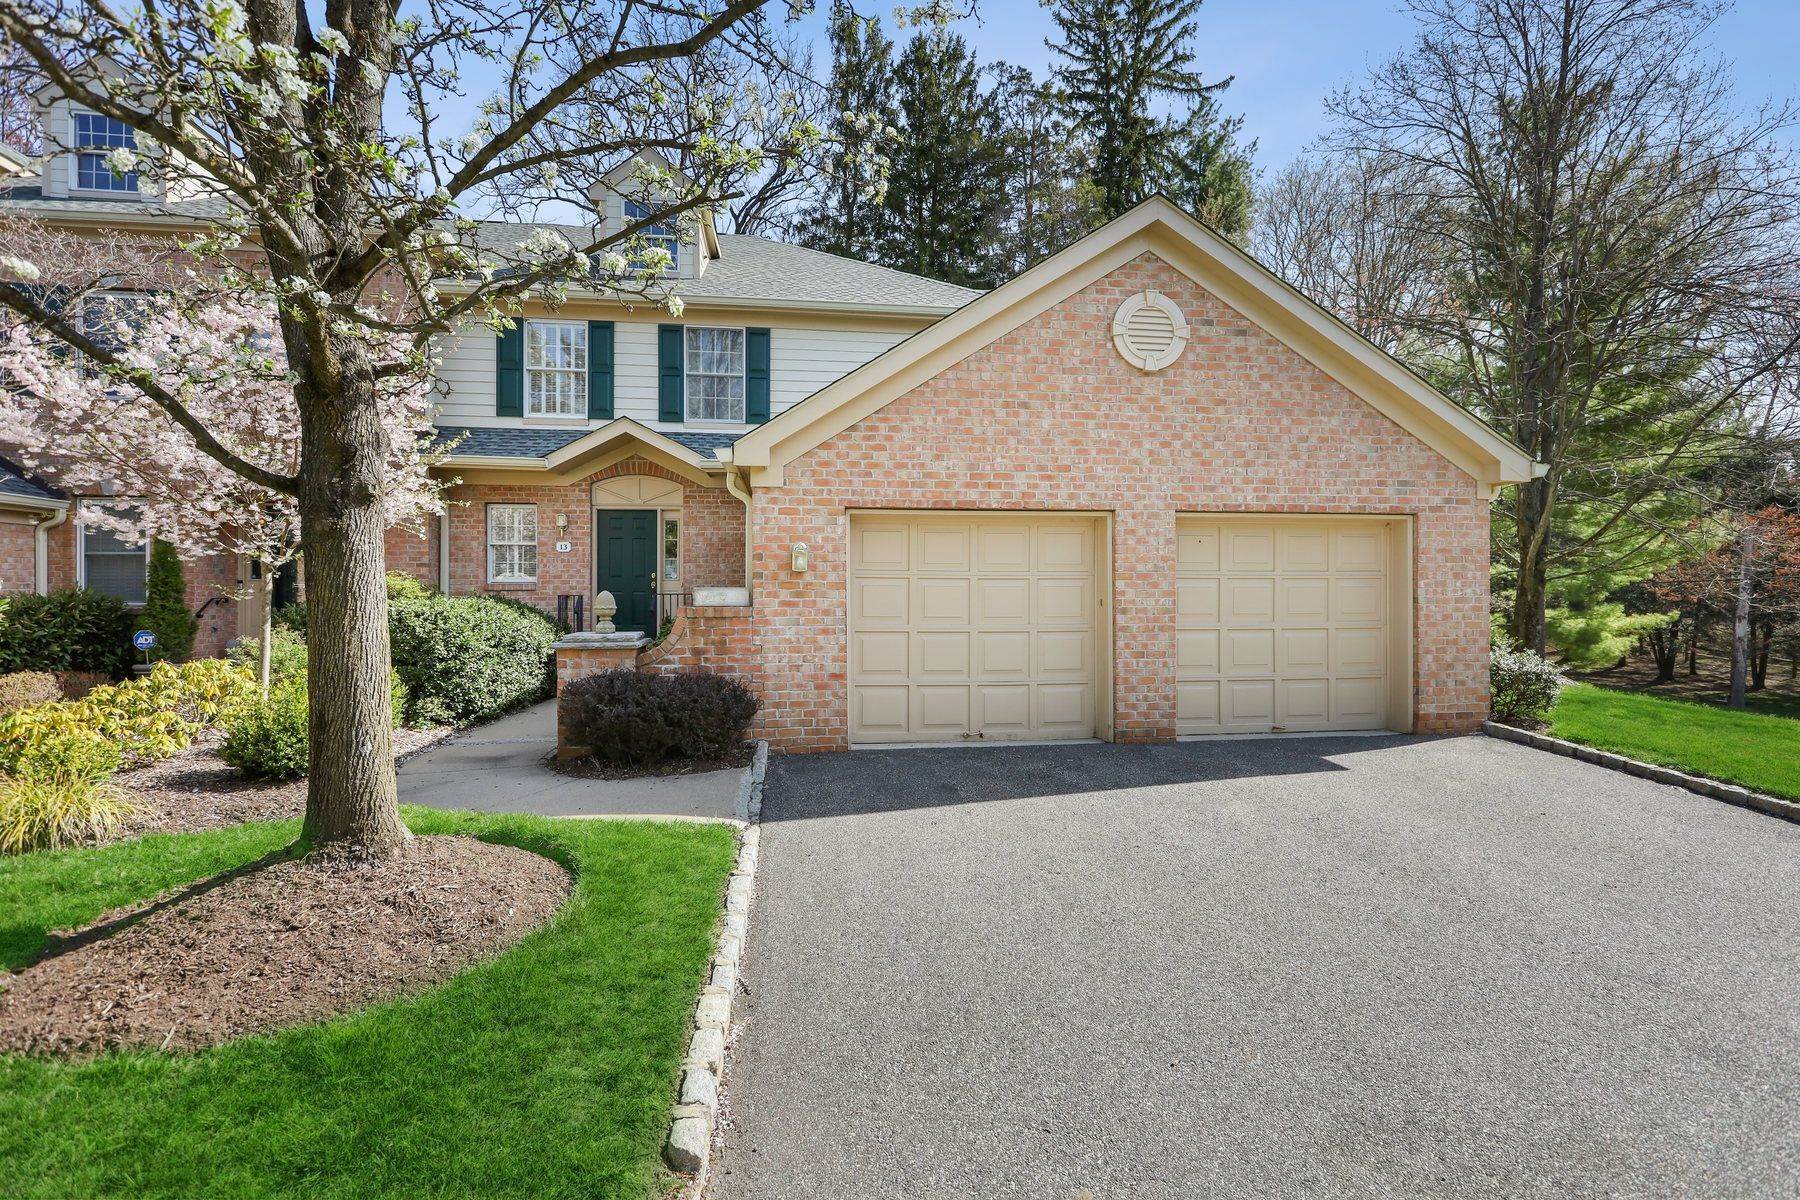 Townhouse for Sale at 13 Chadwell Place, Morris Township, NJ 07960 Morris Township, New Jersey 07960 United States